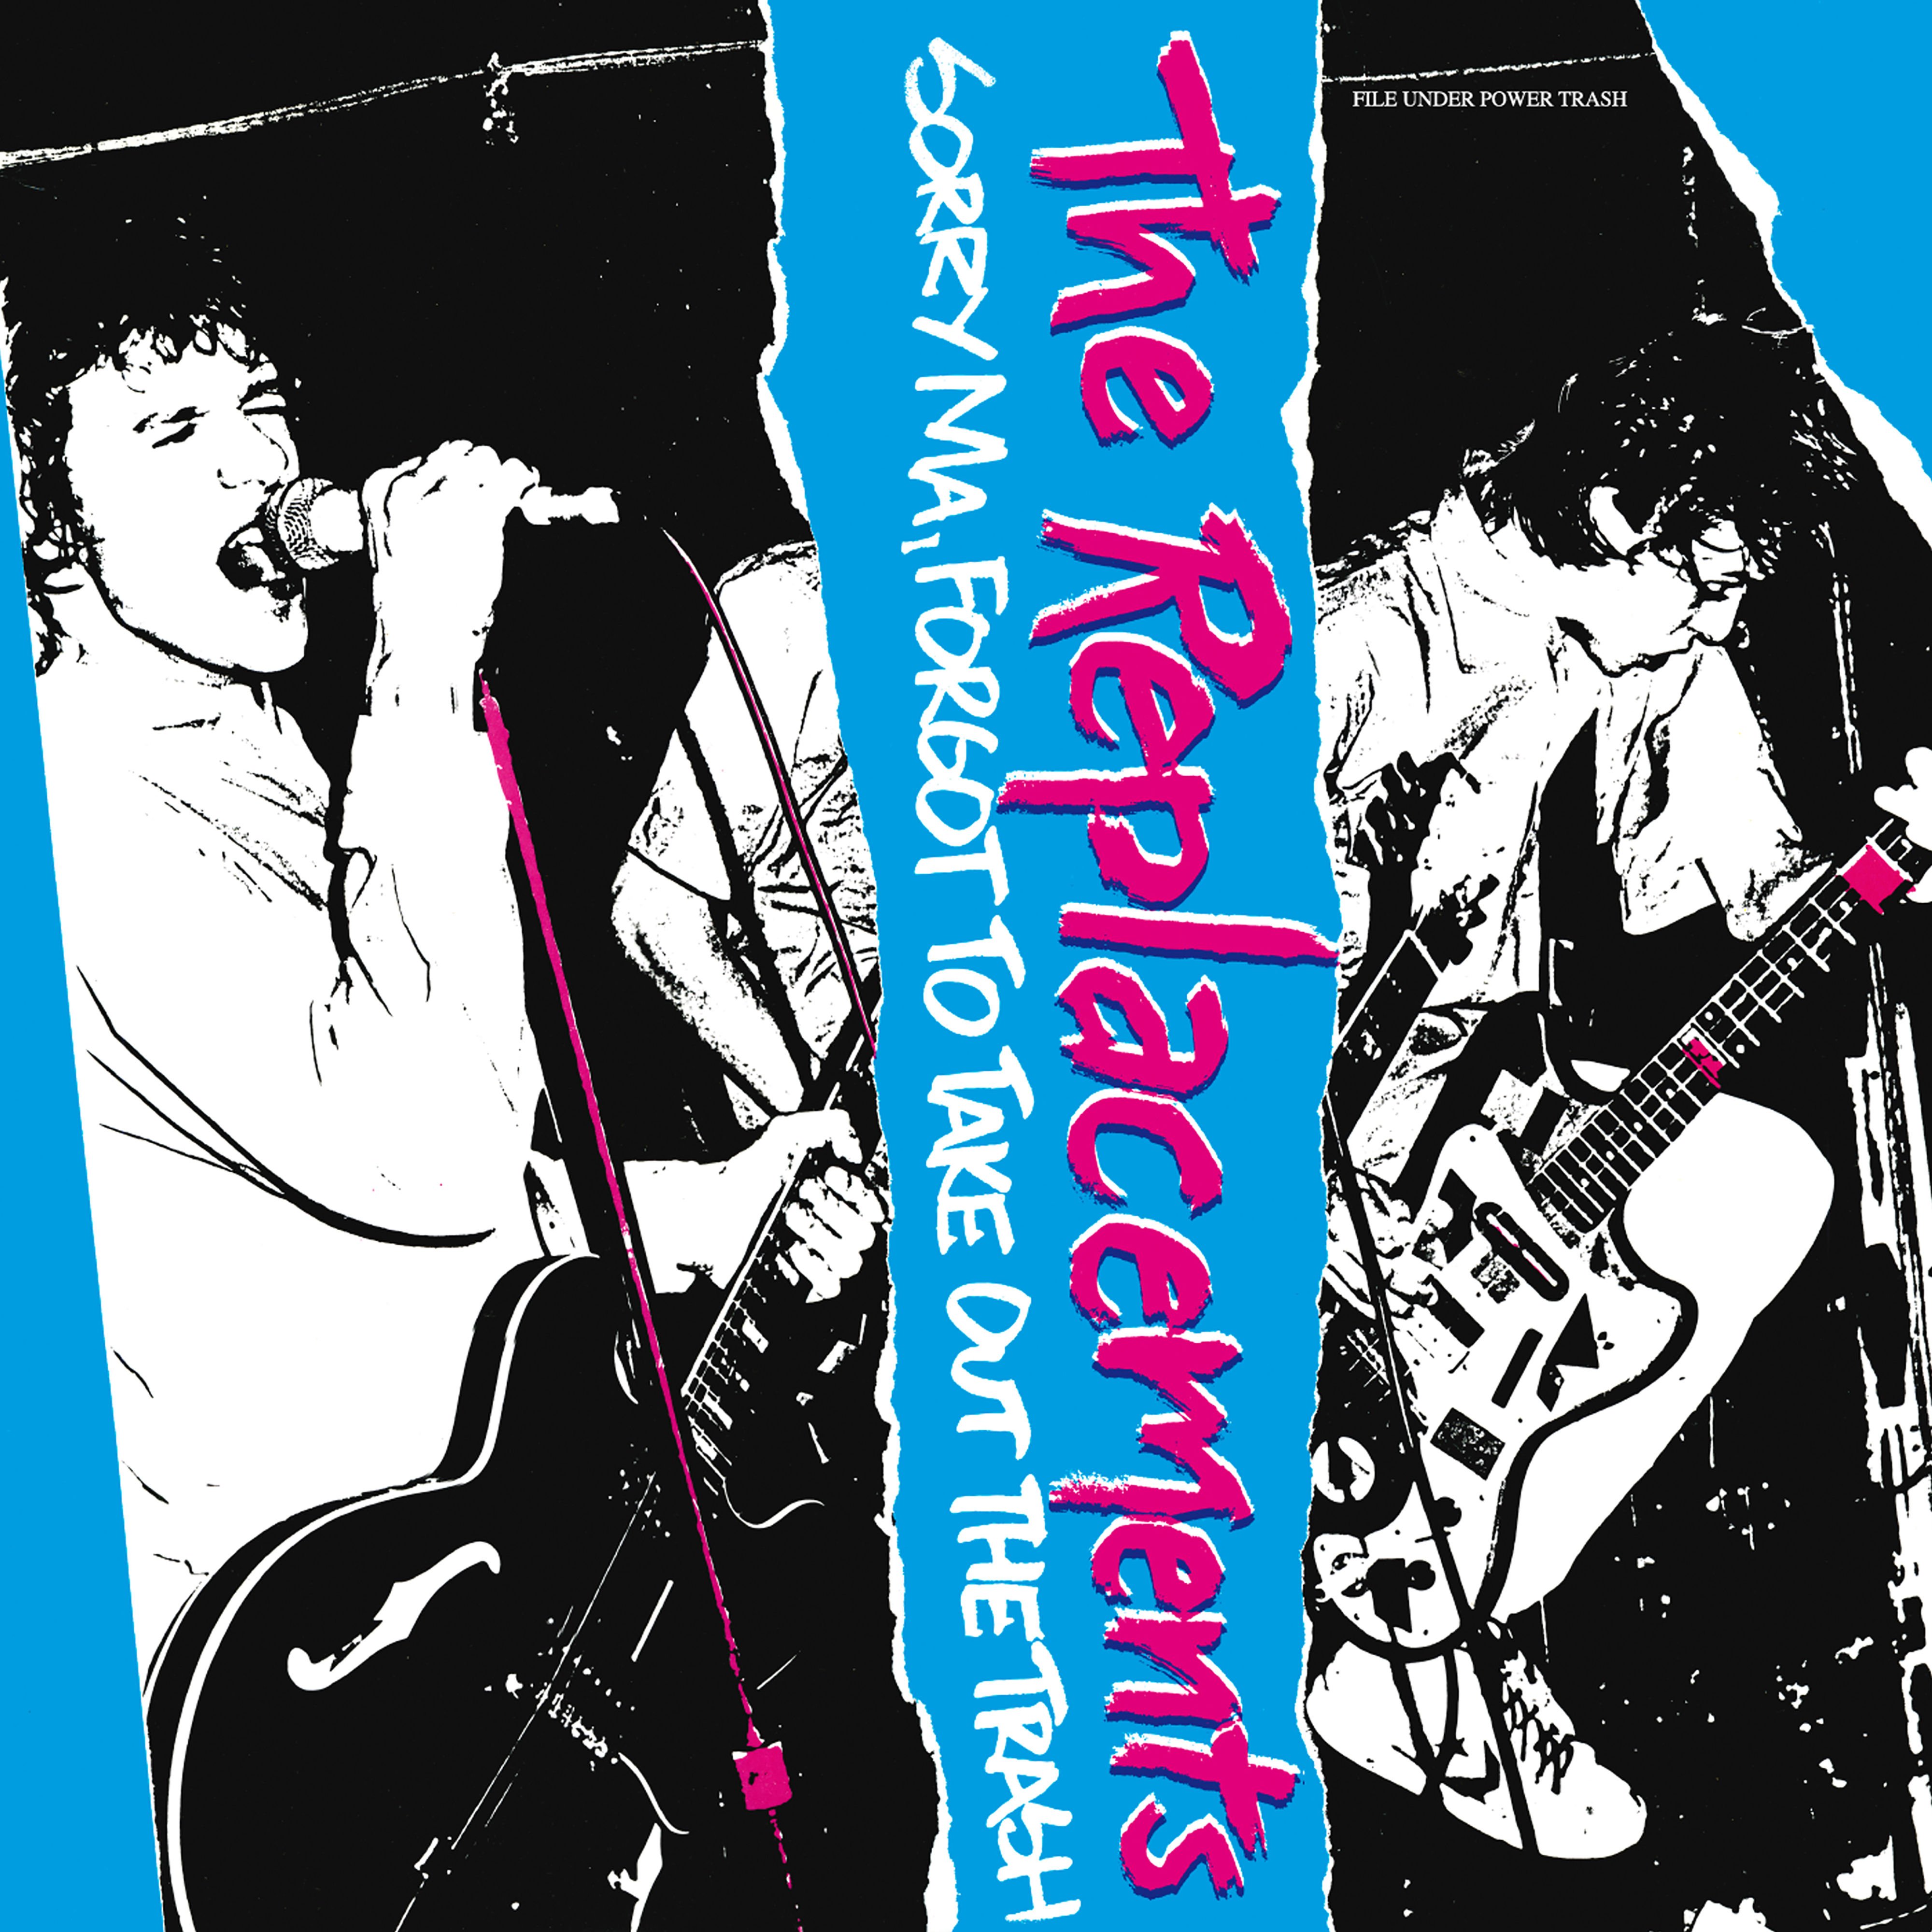 The Replacements - Sorry Ma, Forgot To Take Out The Trash (2021) 24bit FLAC Download